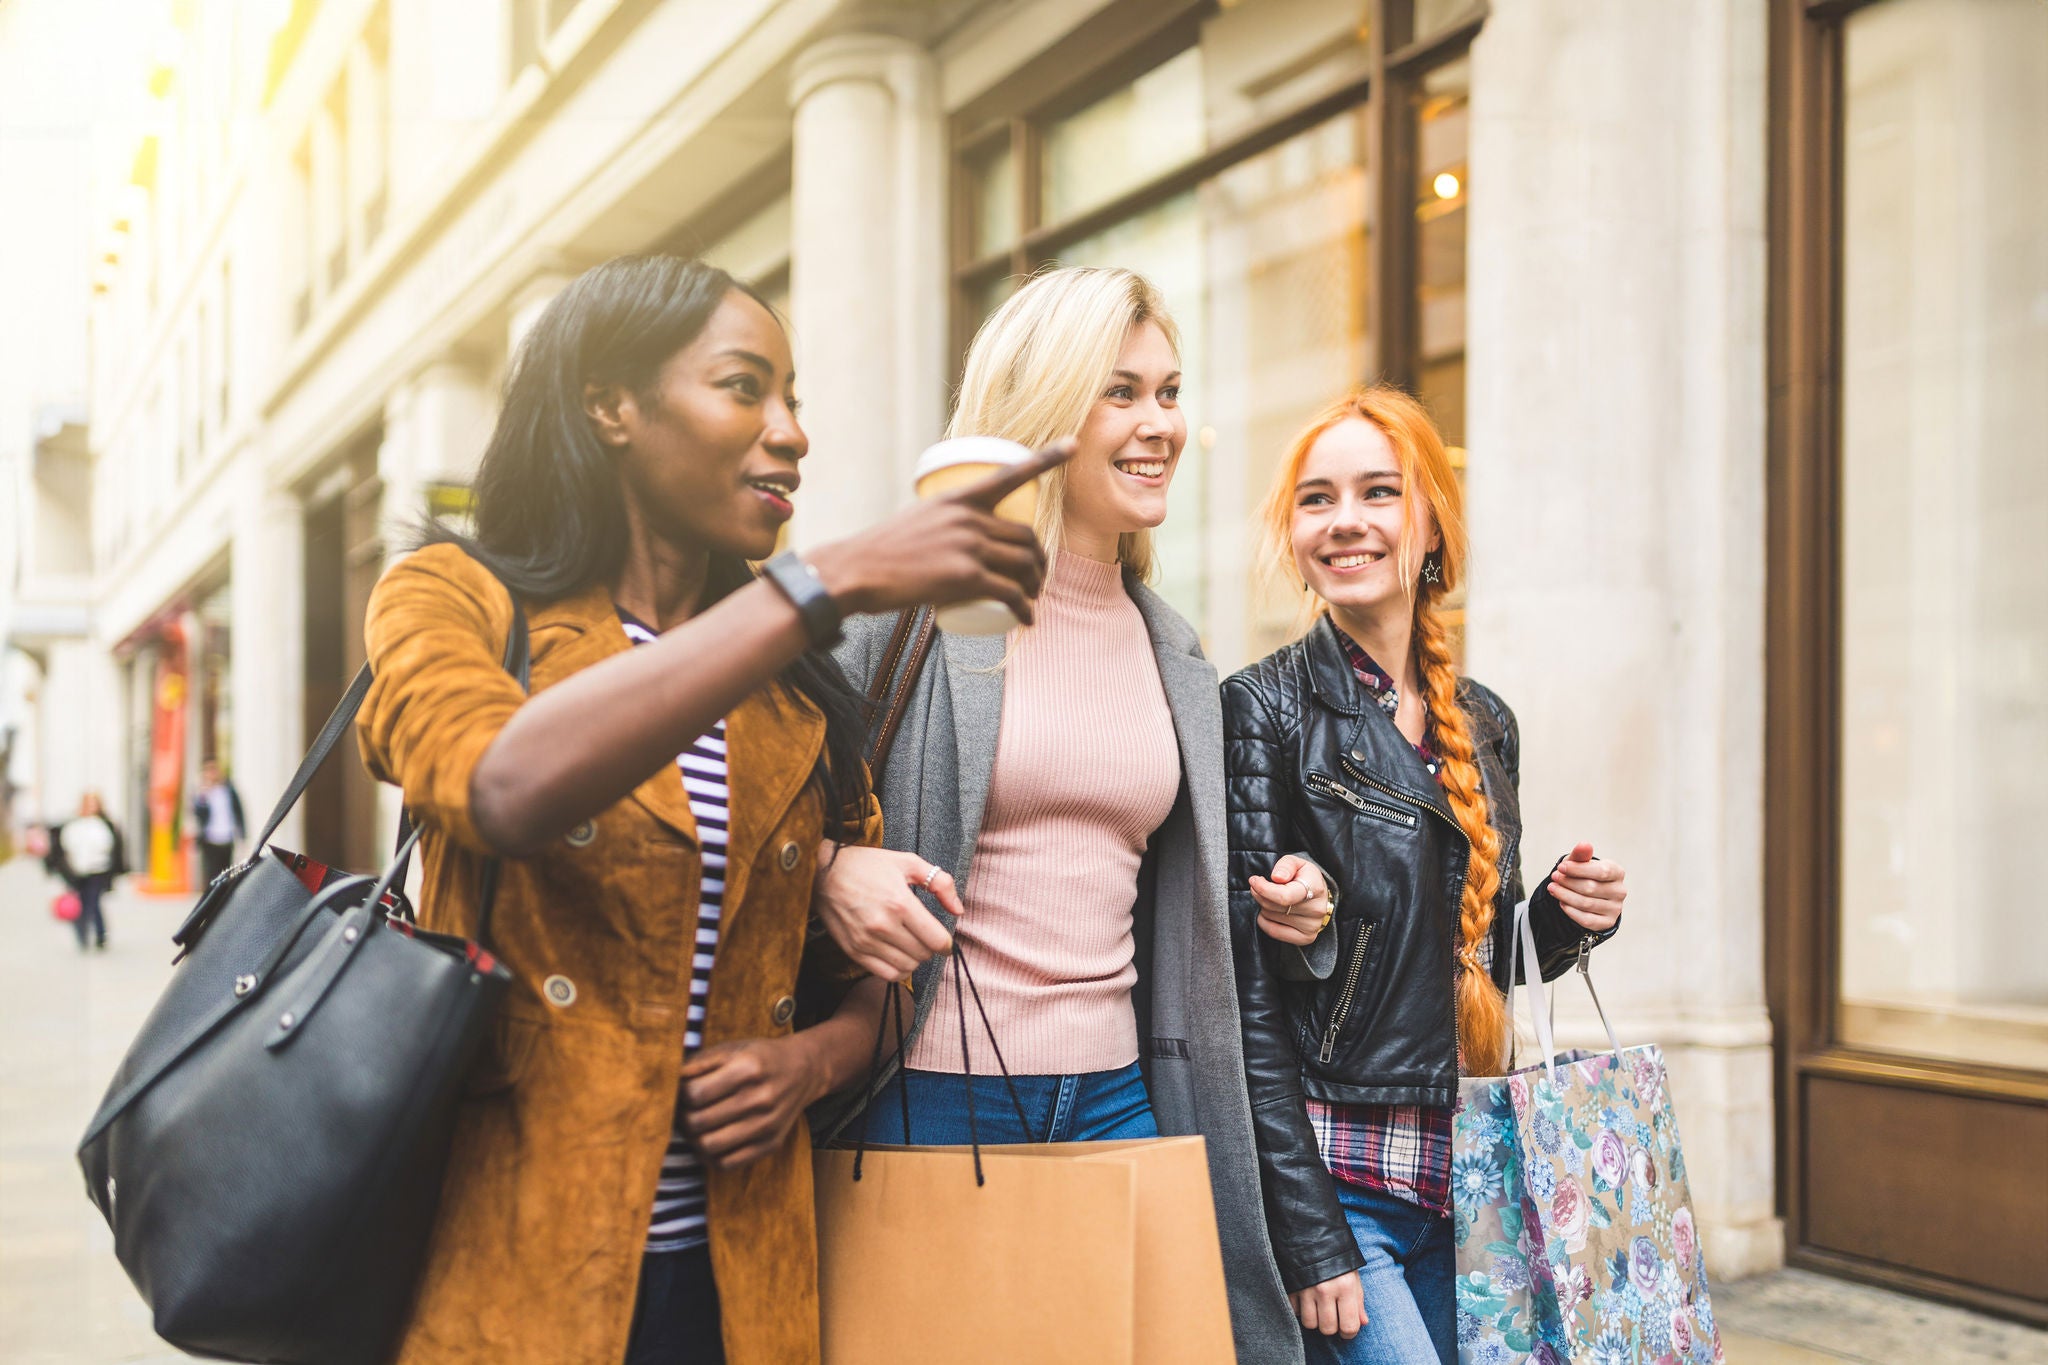 Multiracial group of women shopping and walking in London. Three girls, mixed race group, having fun in the city while shopping. Best friends sharing happy moments together